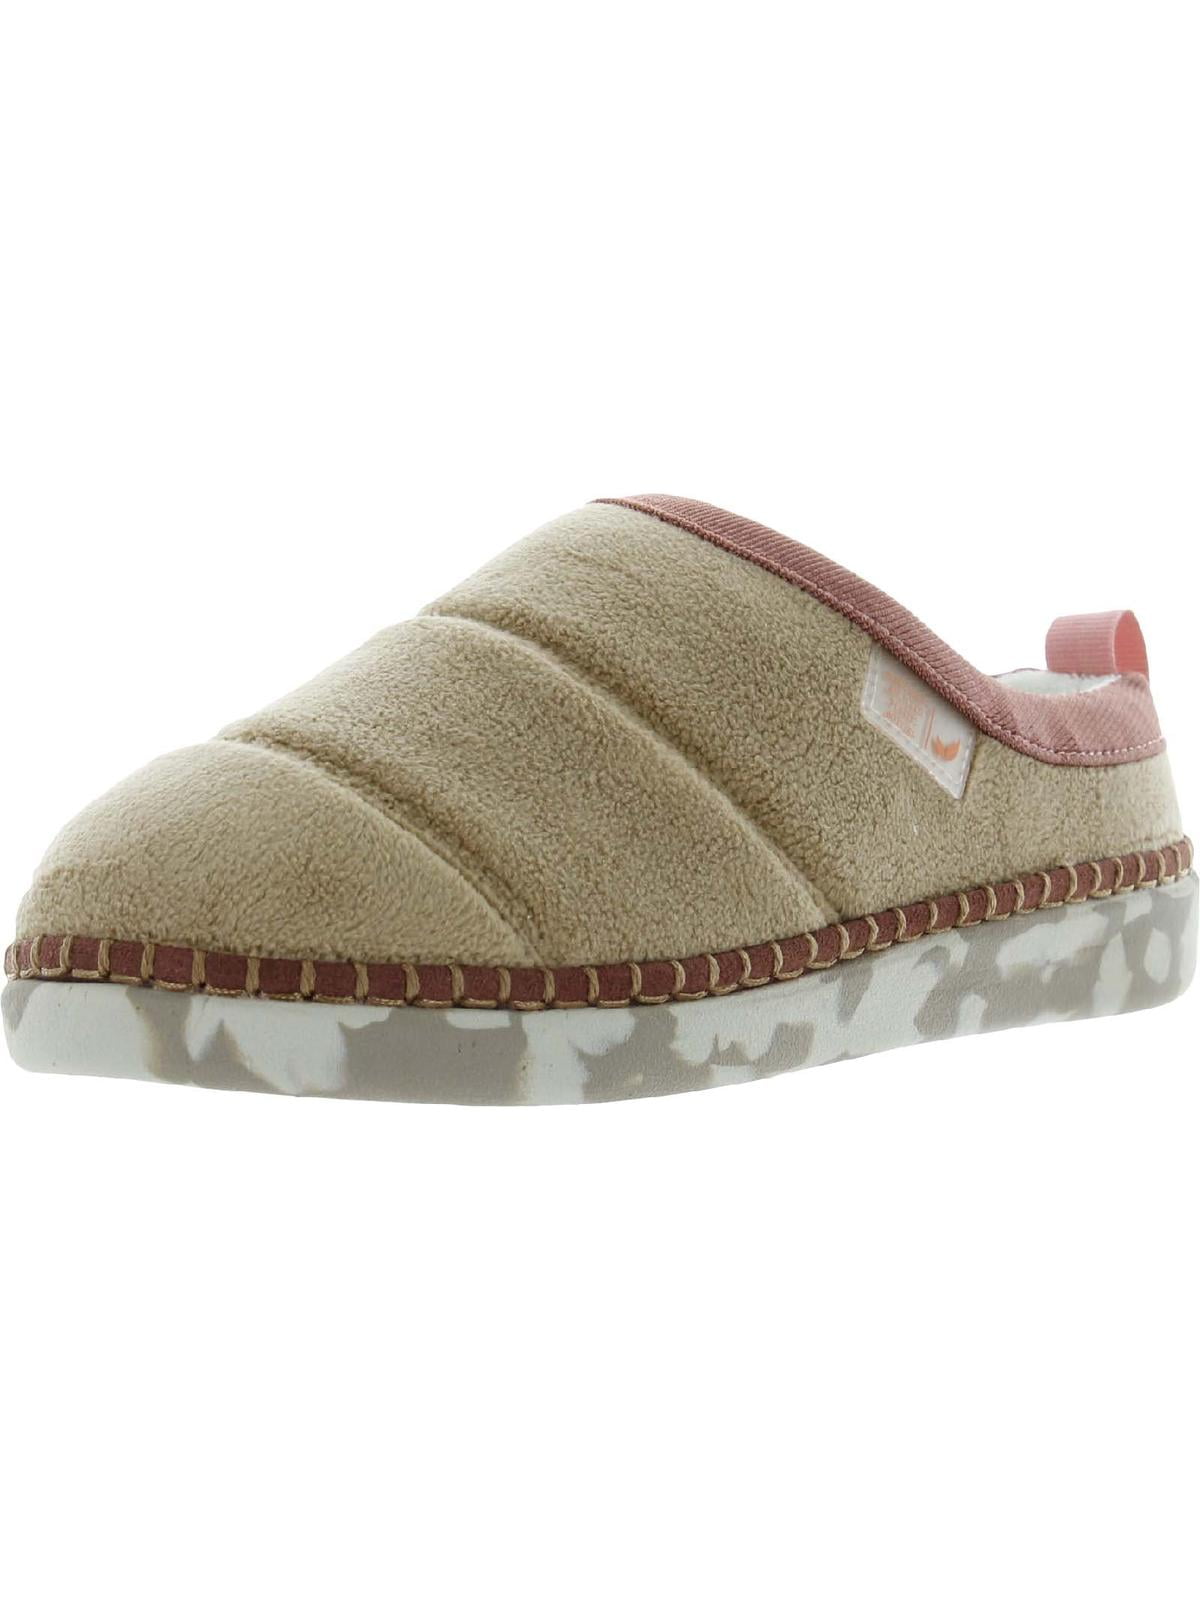 Dr. Scholl's Shoes Womens Vibes Slip On Slides Mule Slippers - Walmart.com